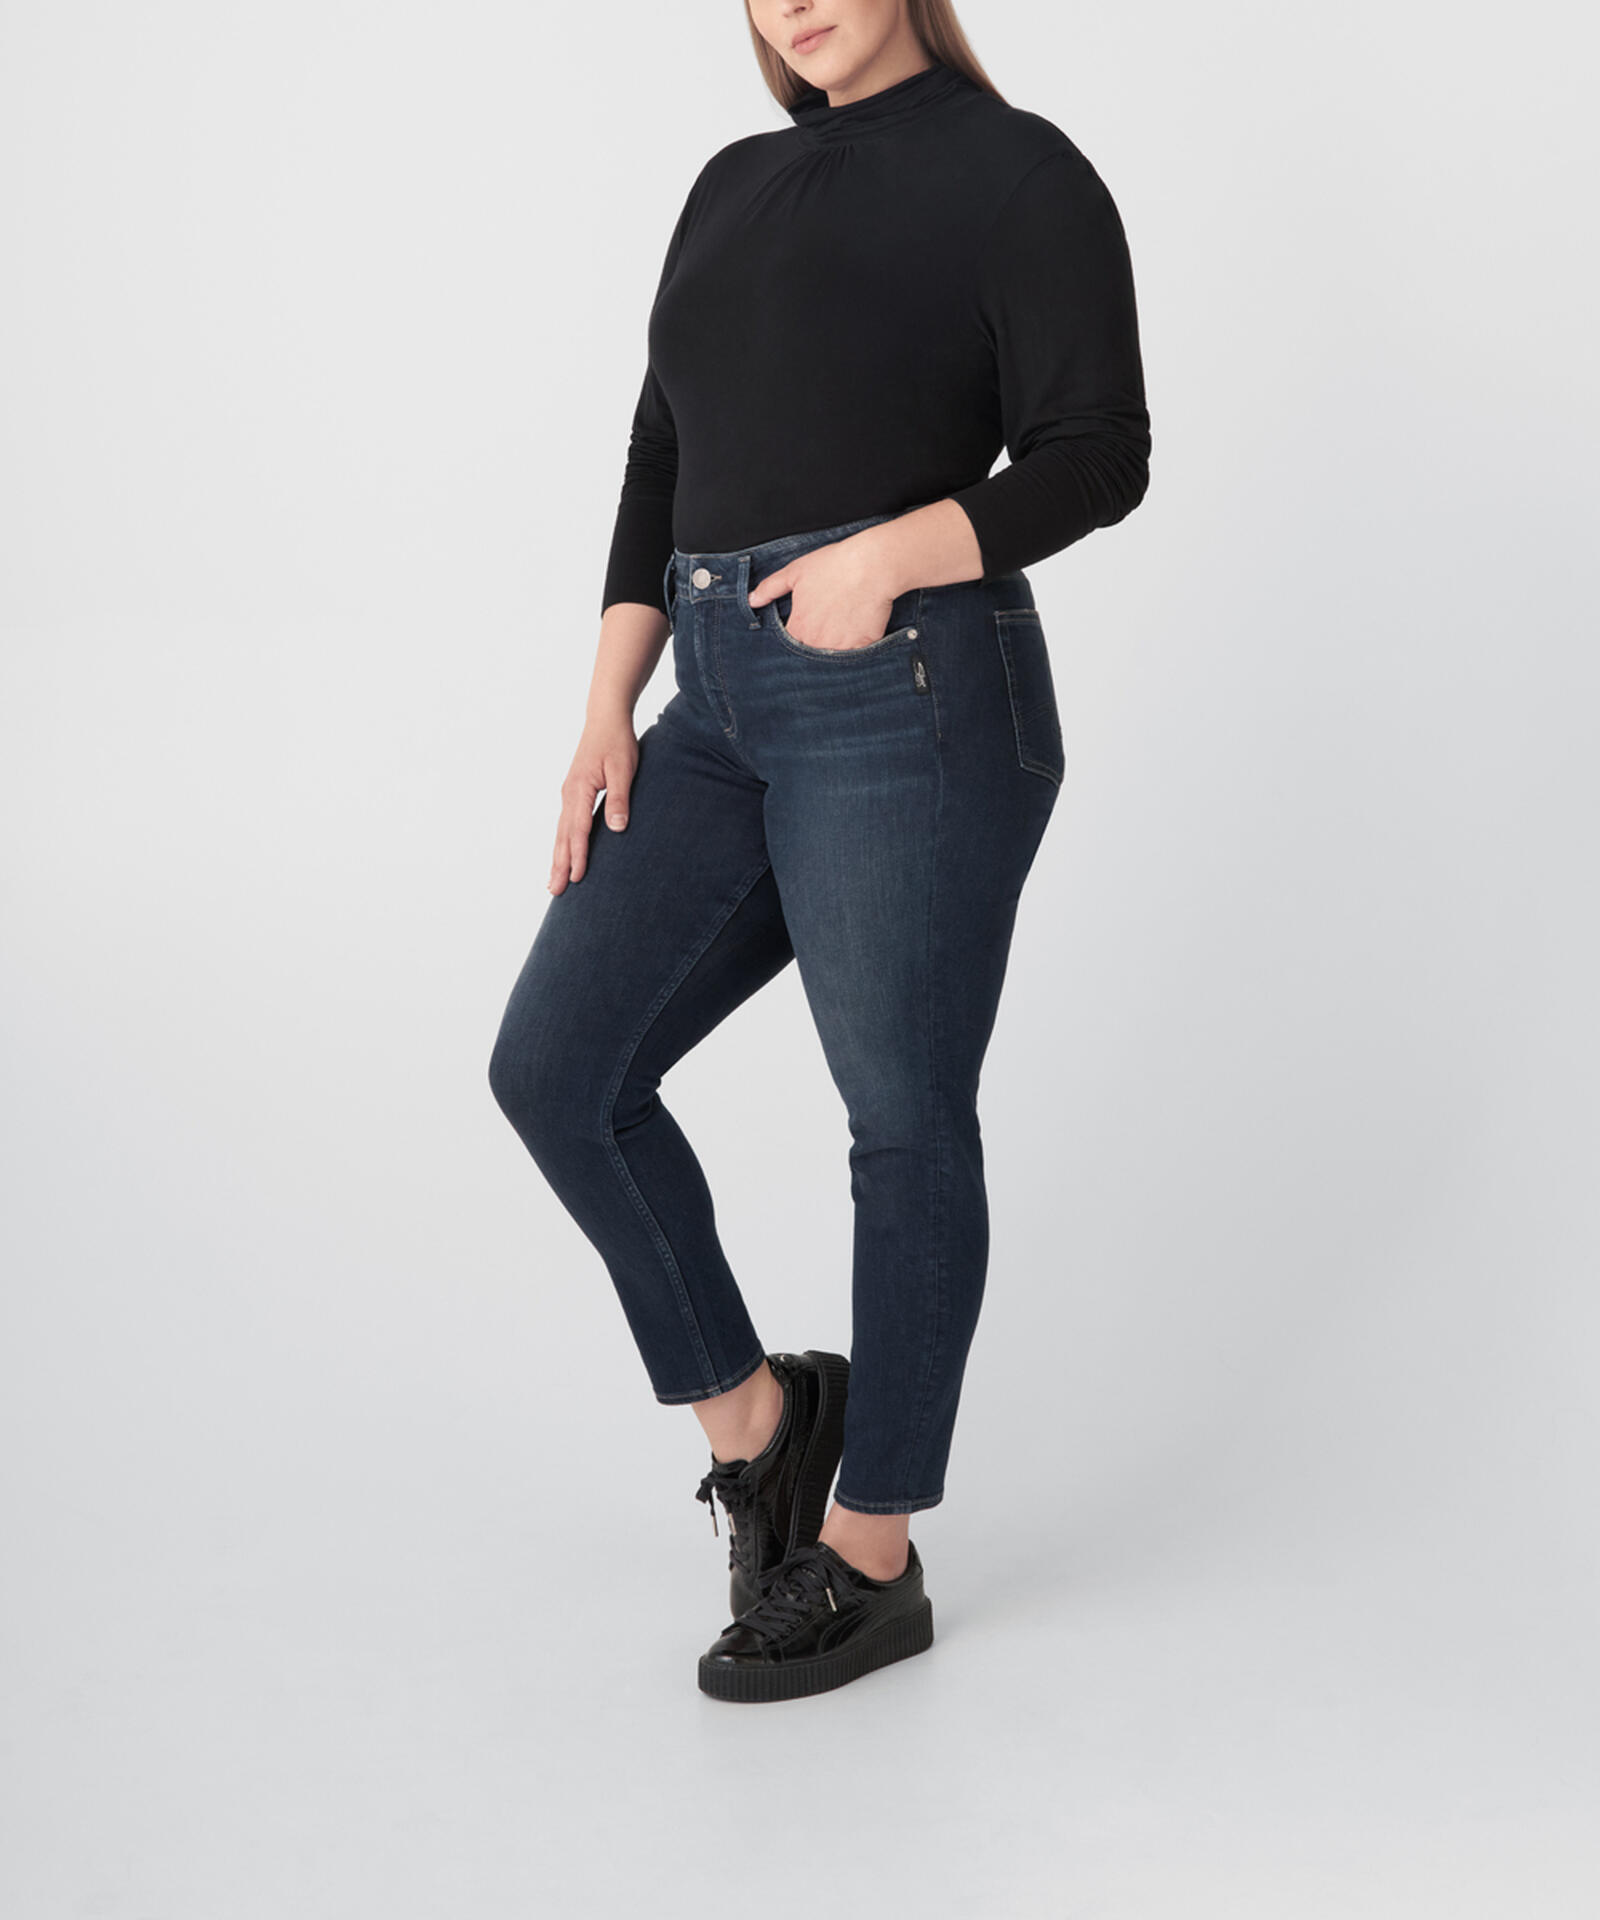 Plus Size Skinny Jeans at Every Size